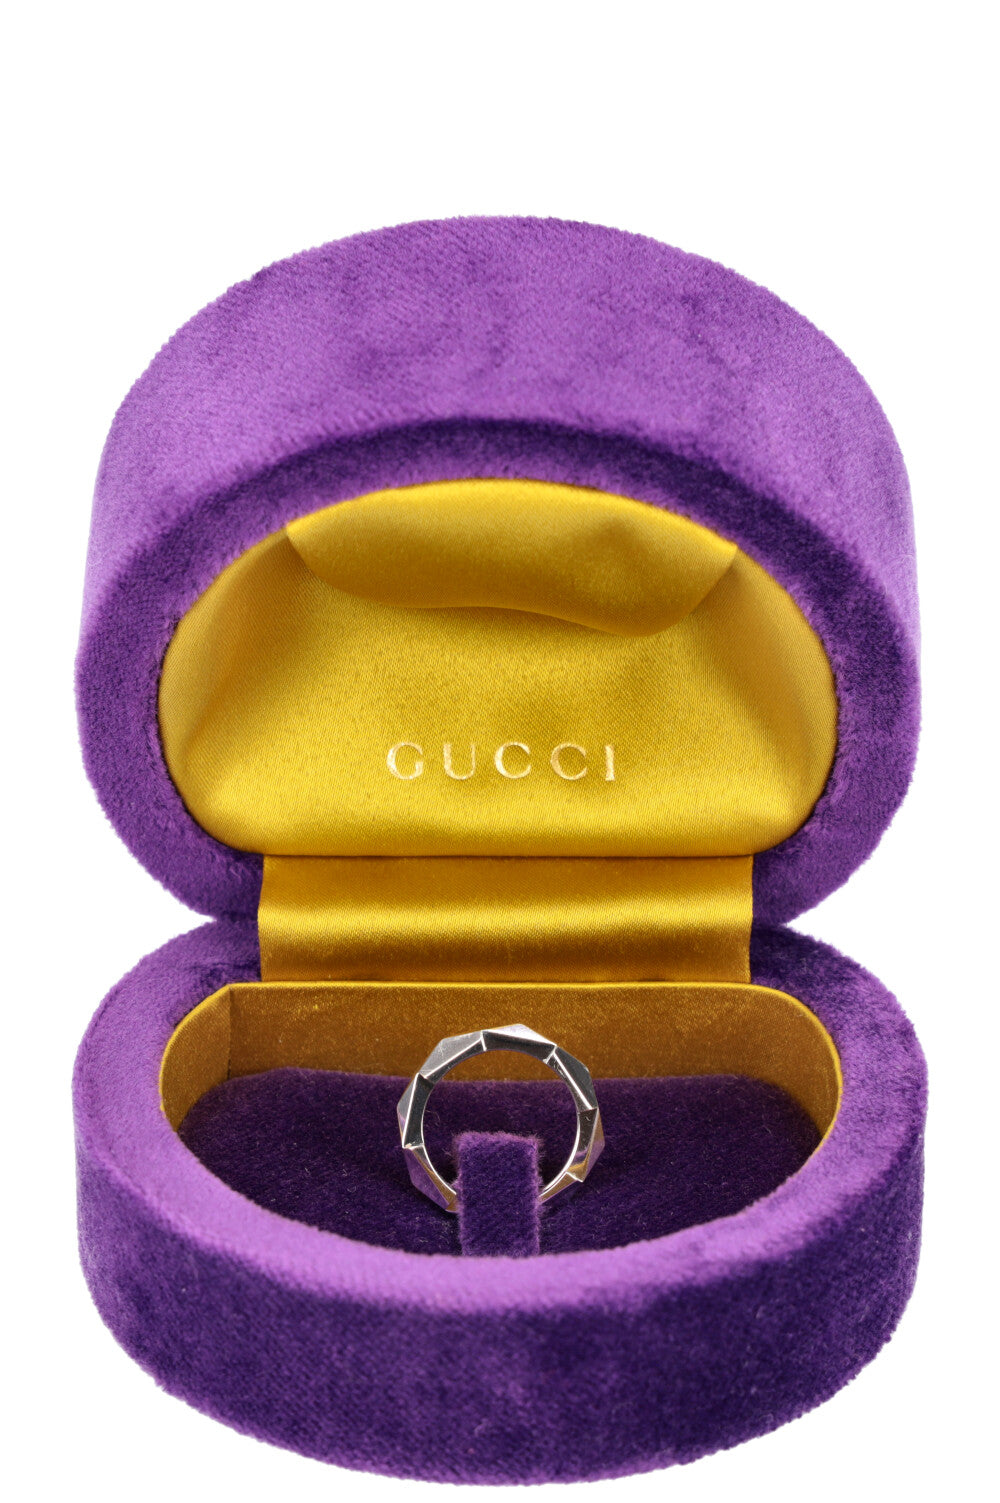 GUCCI Link to Love Ring 18k White Gold